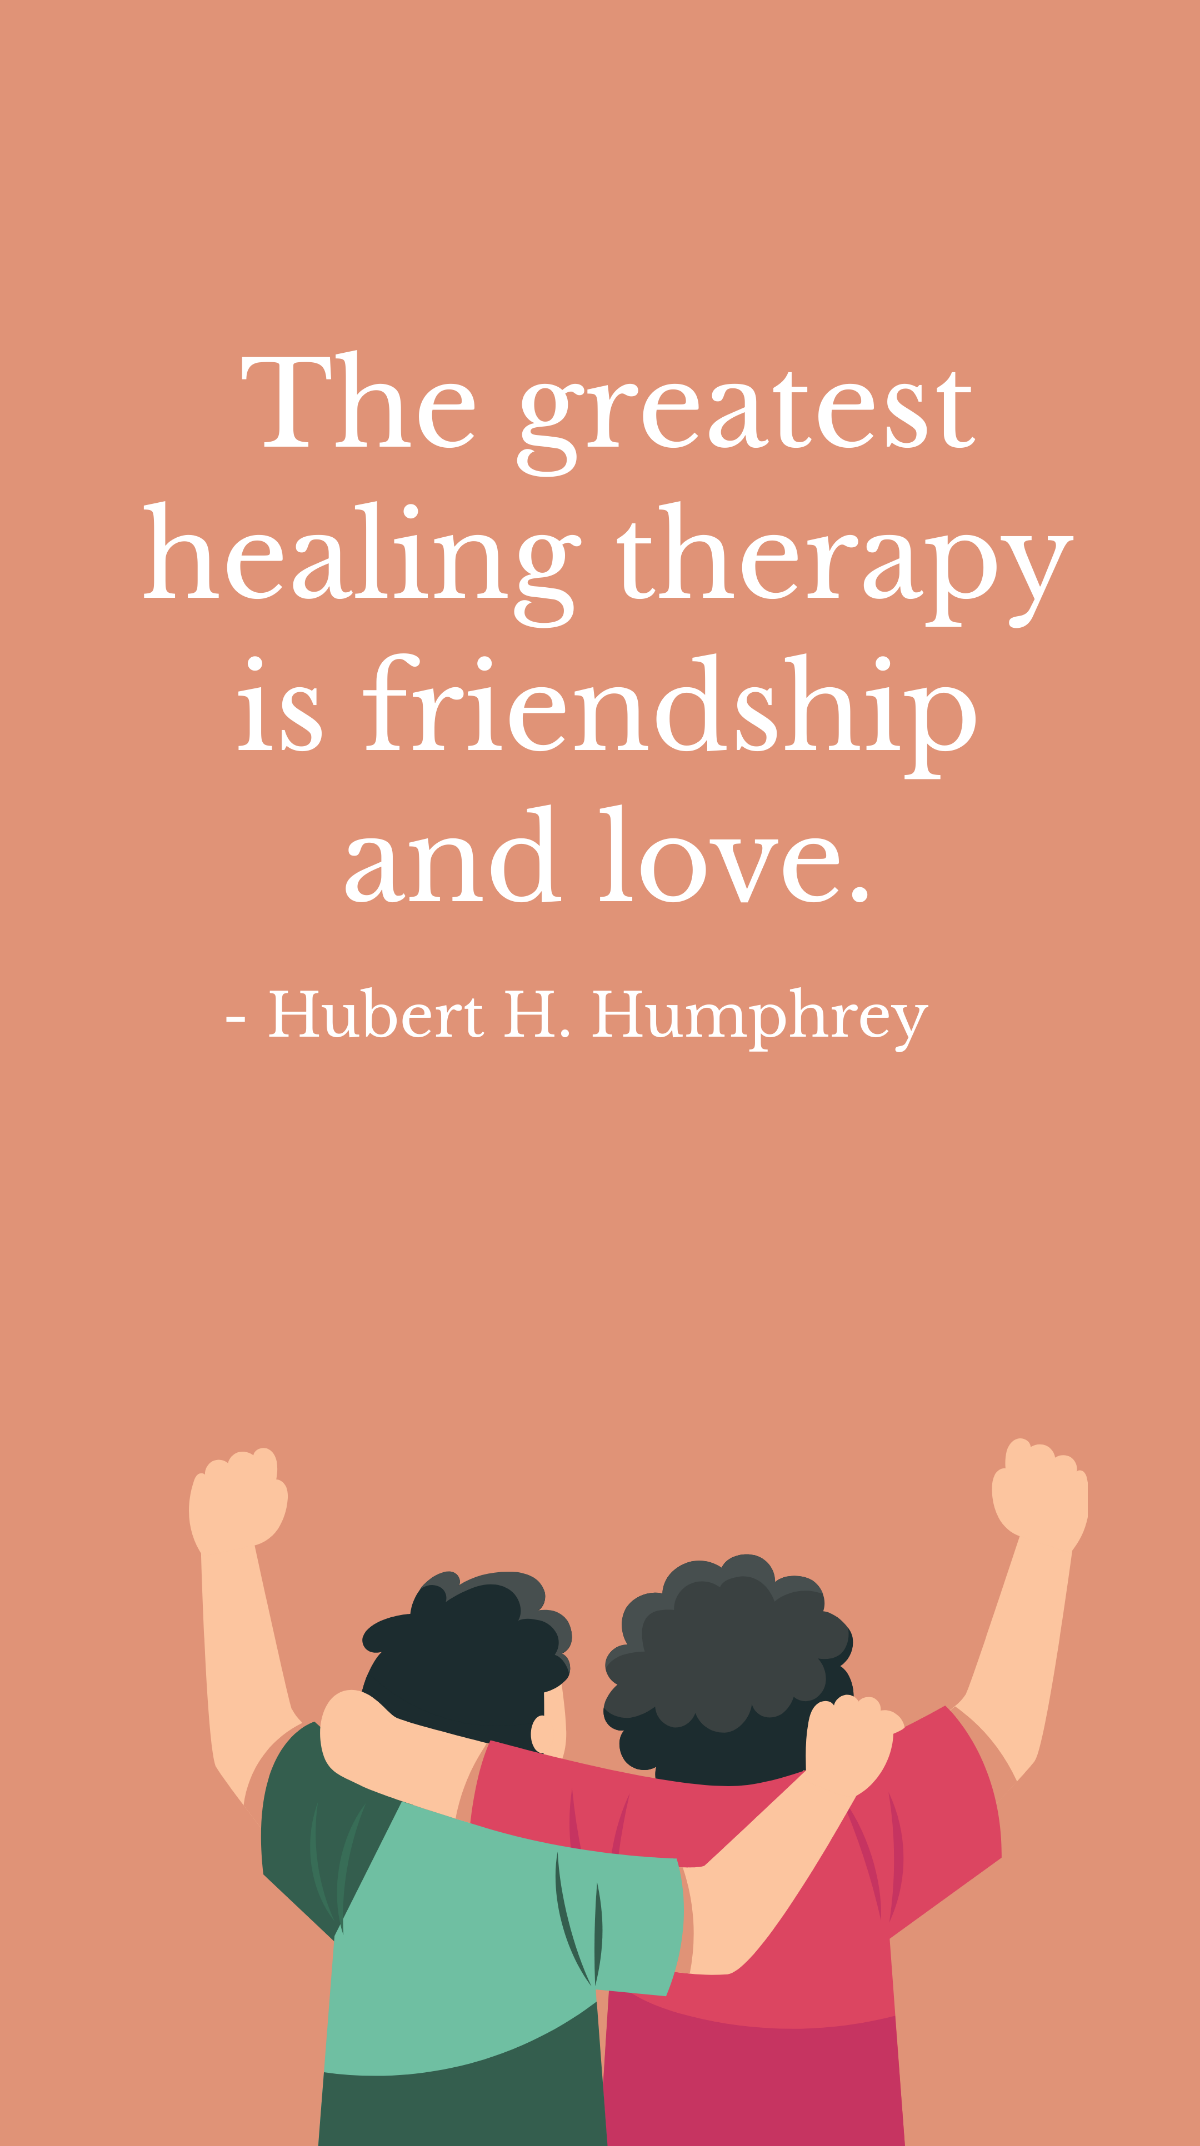 Hubert H. Humphrey - The greatest healing therapy is friendship and love.